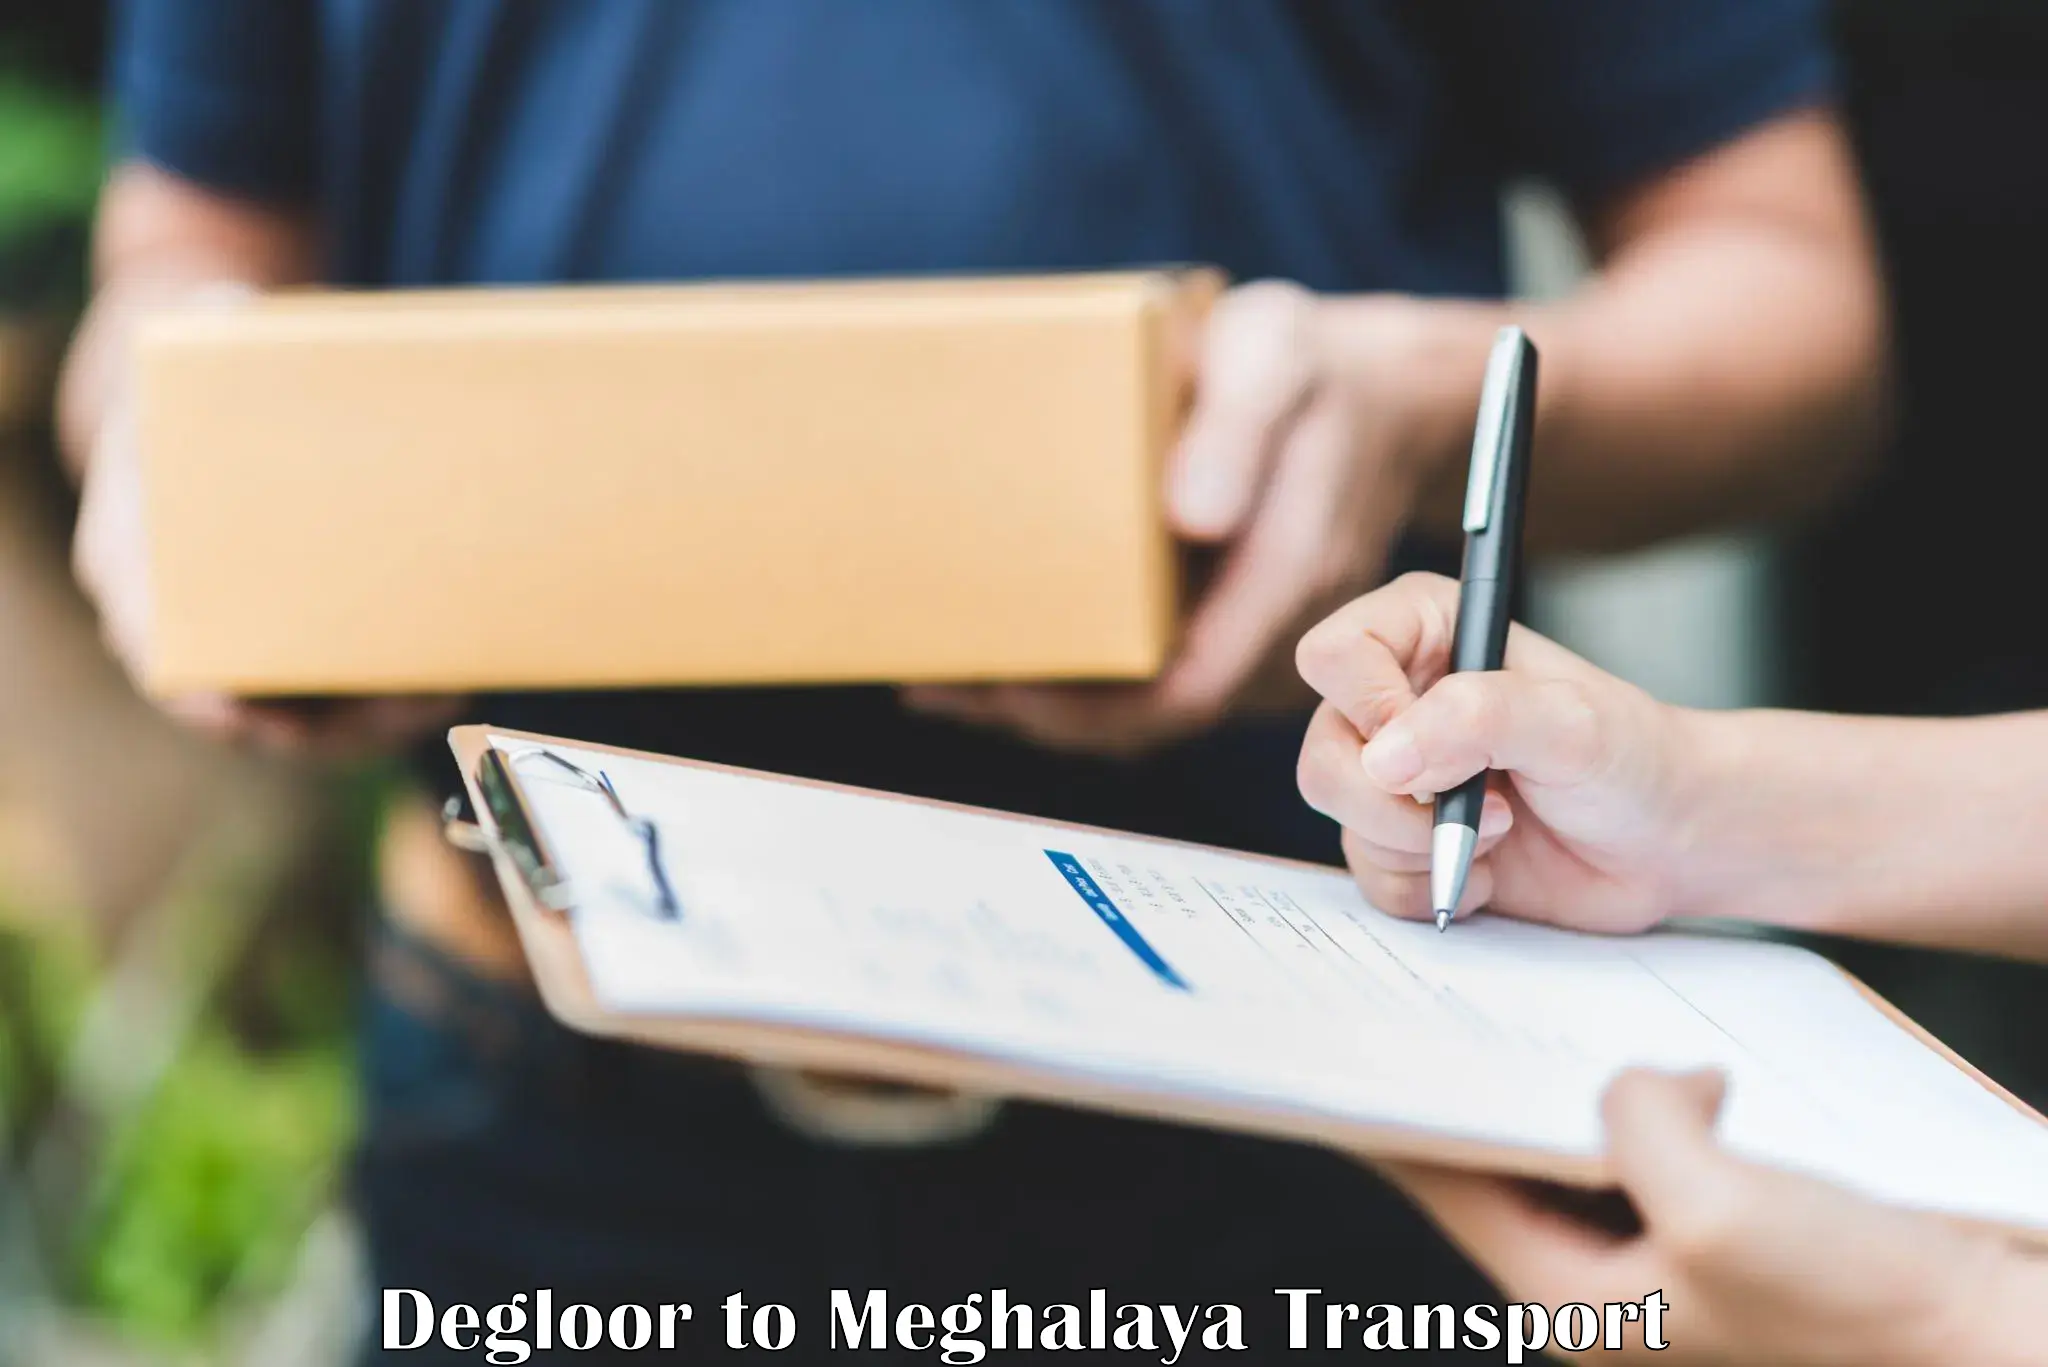 Commercial transport service Degloor to Meghalaya